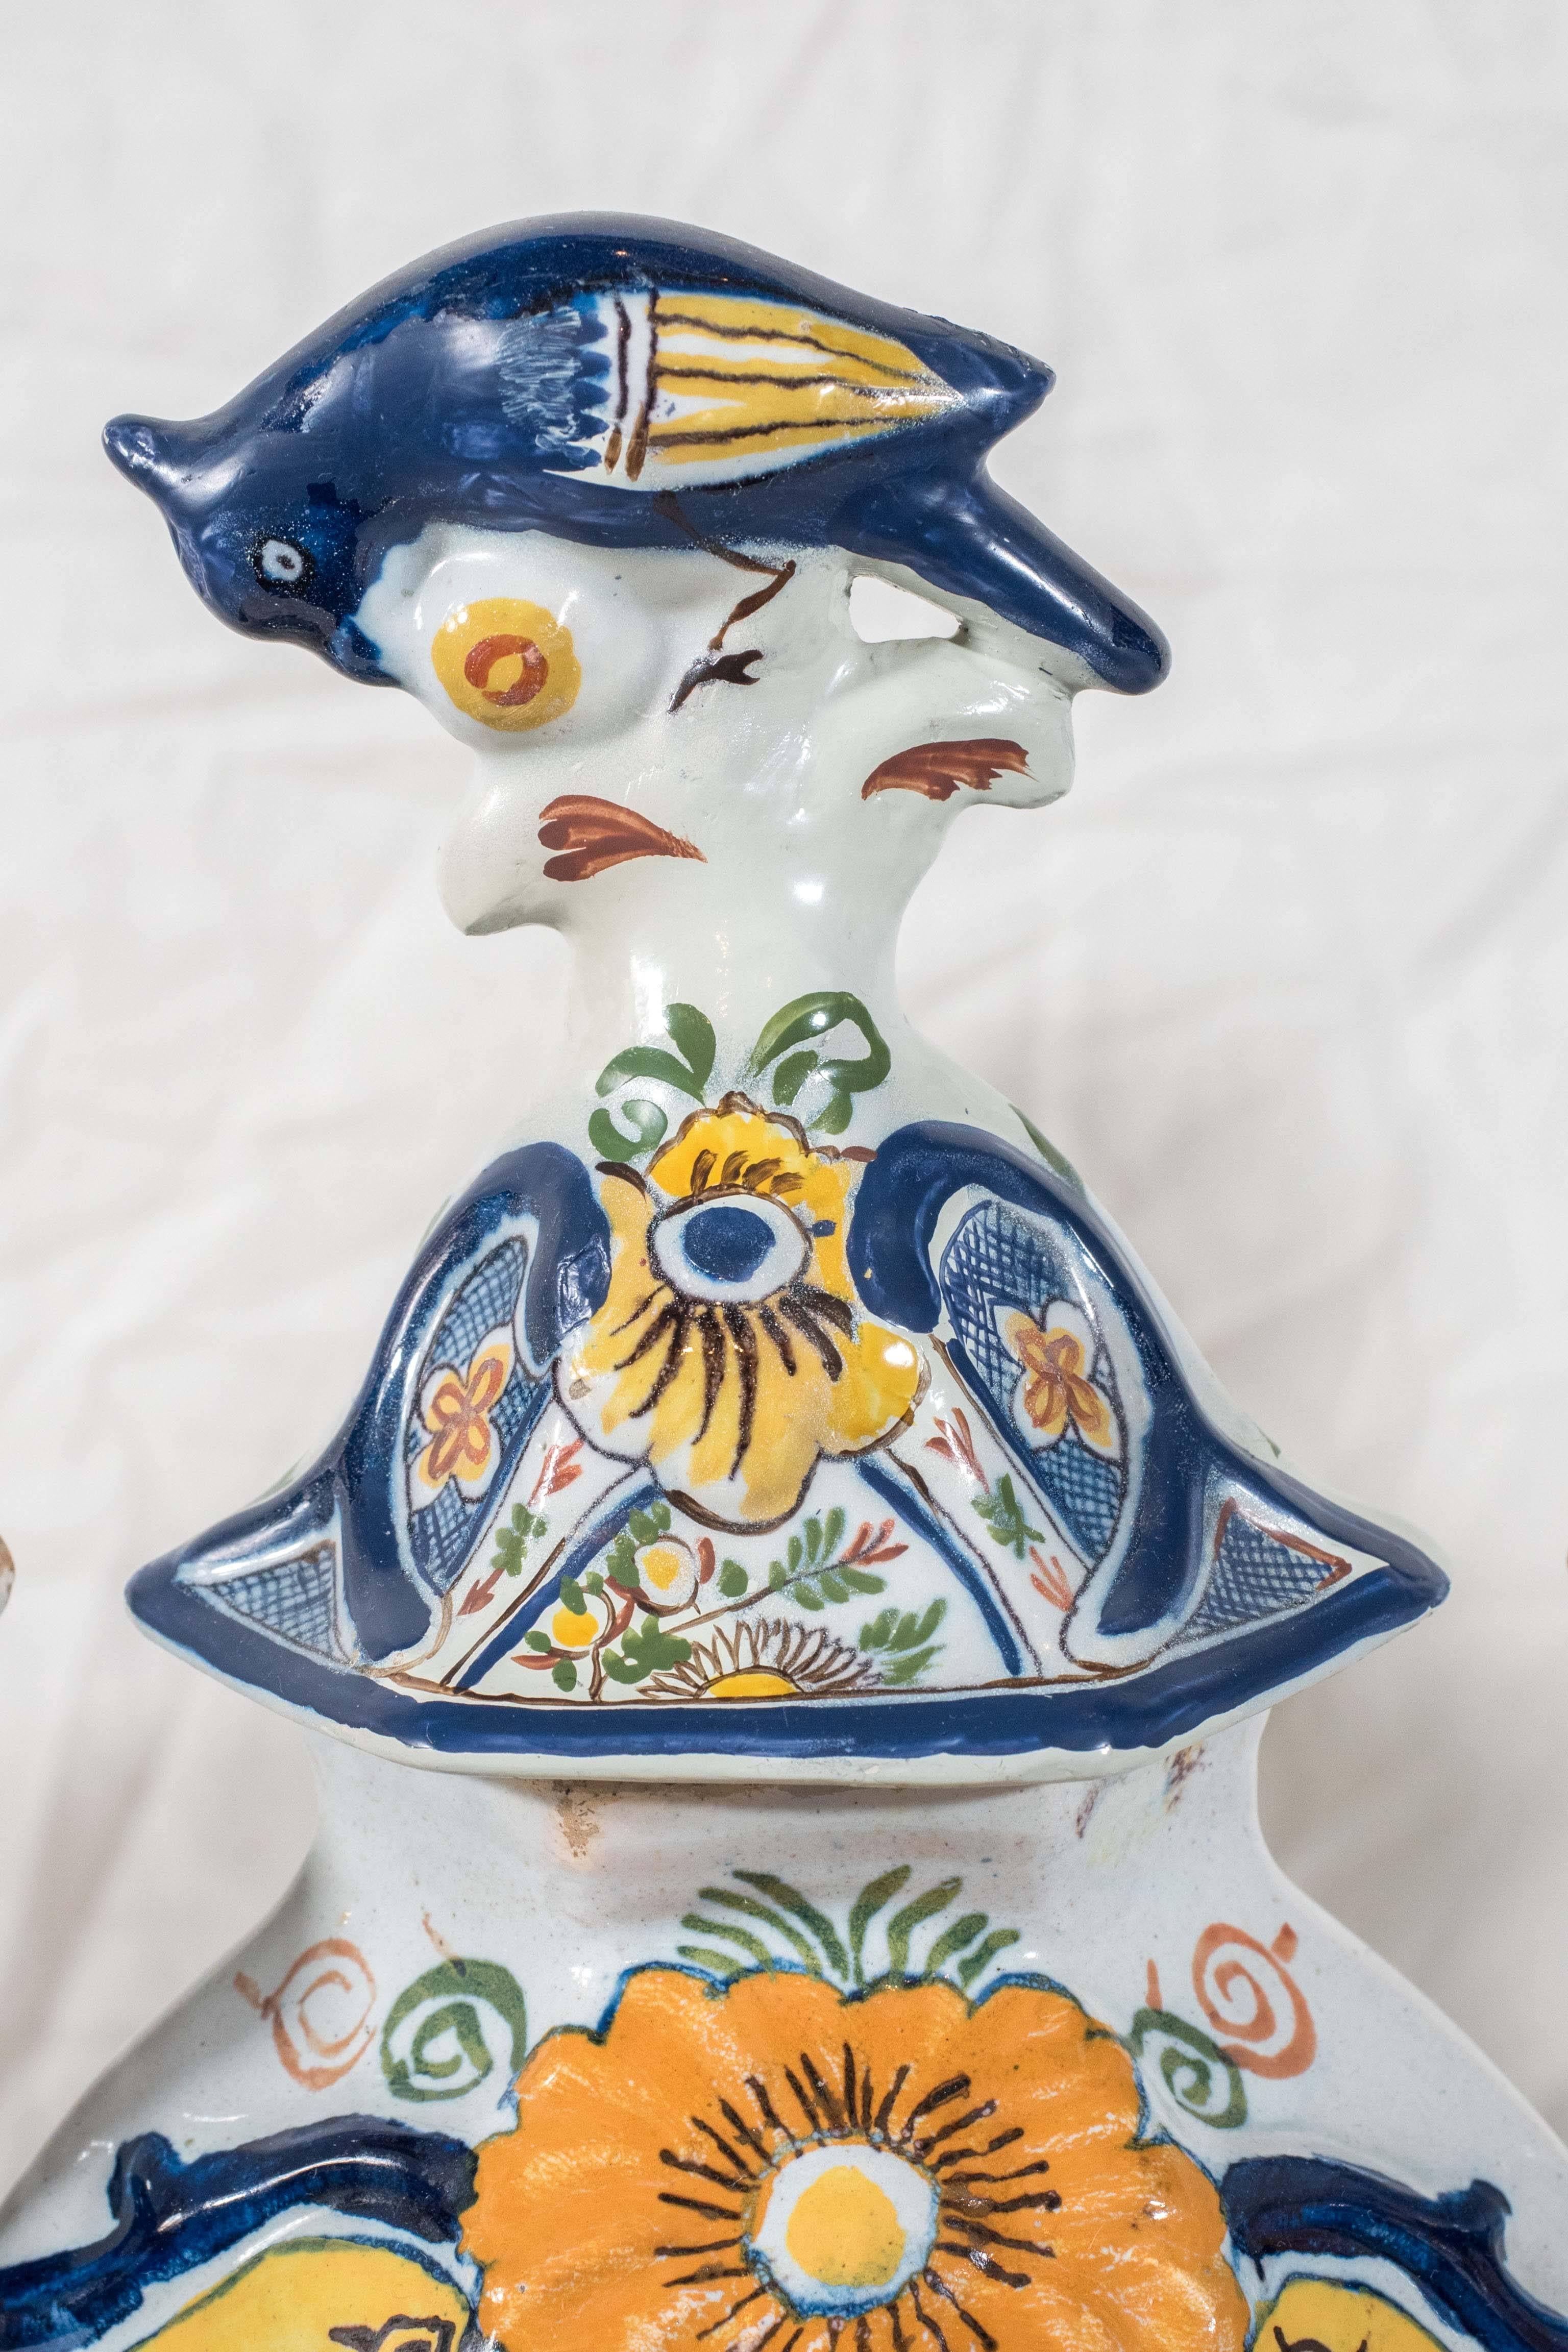 Rococo  Garniture of Five Delft Vases Painted in Colorful Polychrome IN STOCK